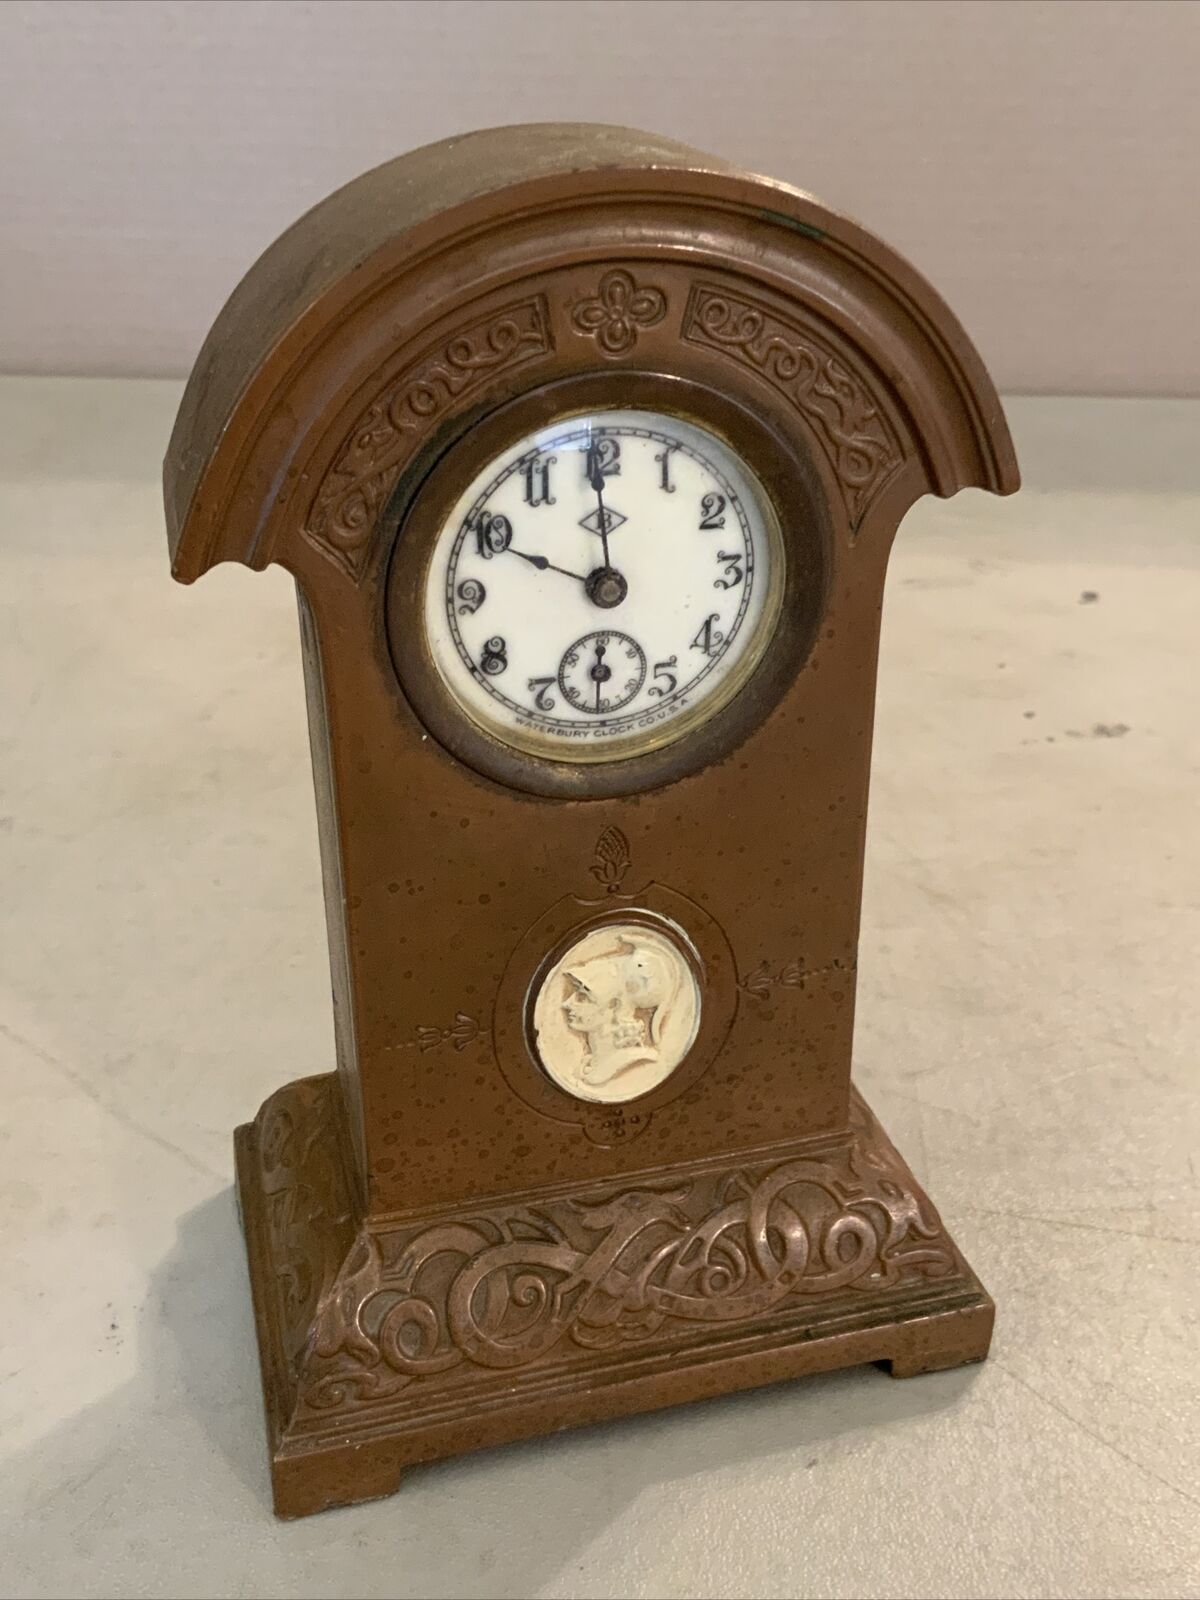 VINTAGE ANTIQUE SMALL NOVELTY WIND UP MANTLE DESK CLOCK- Waterbury Cameo